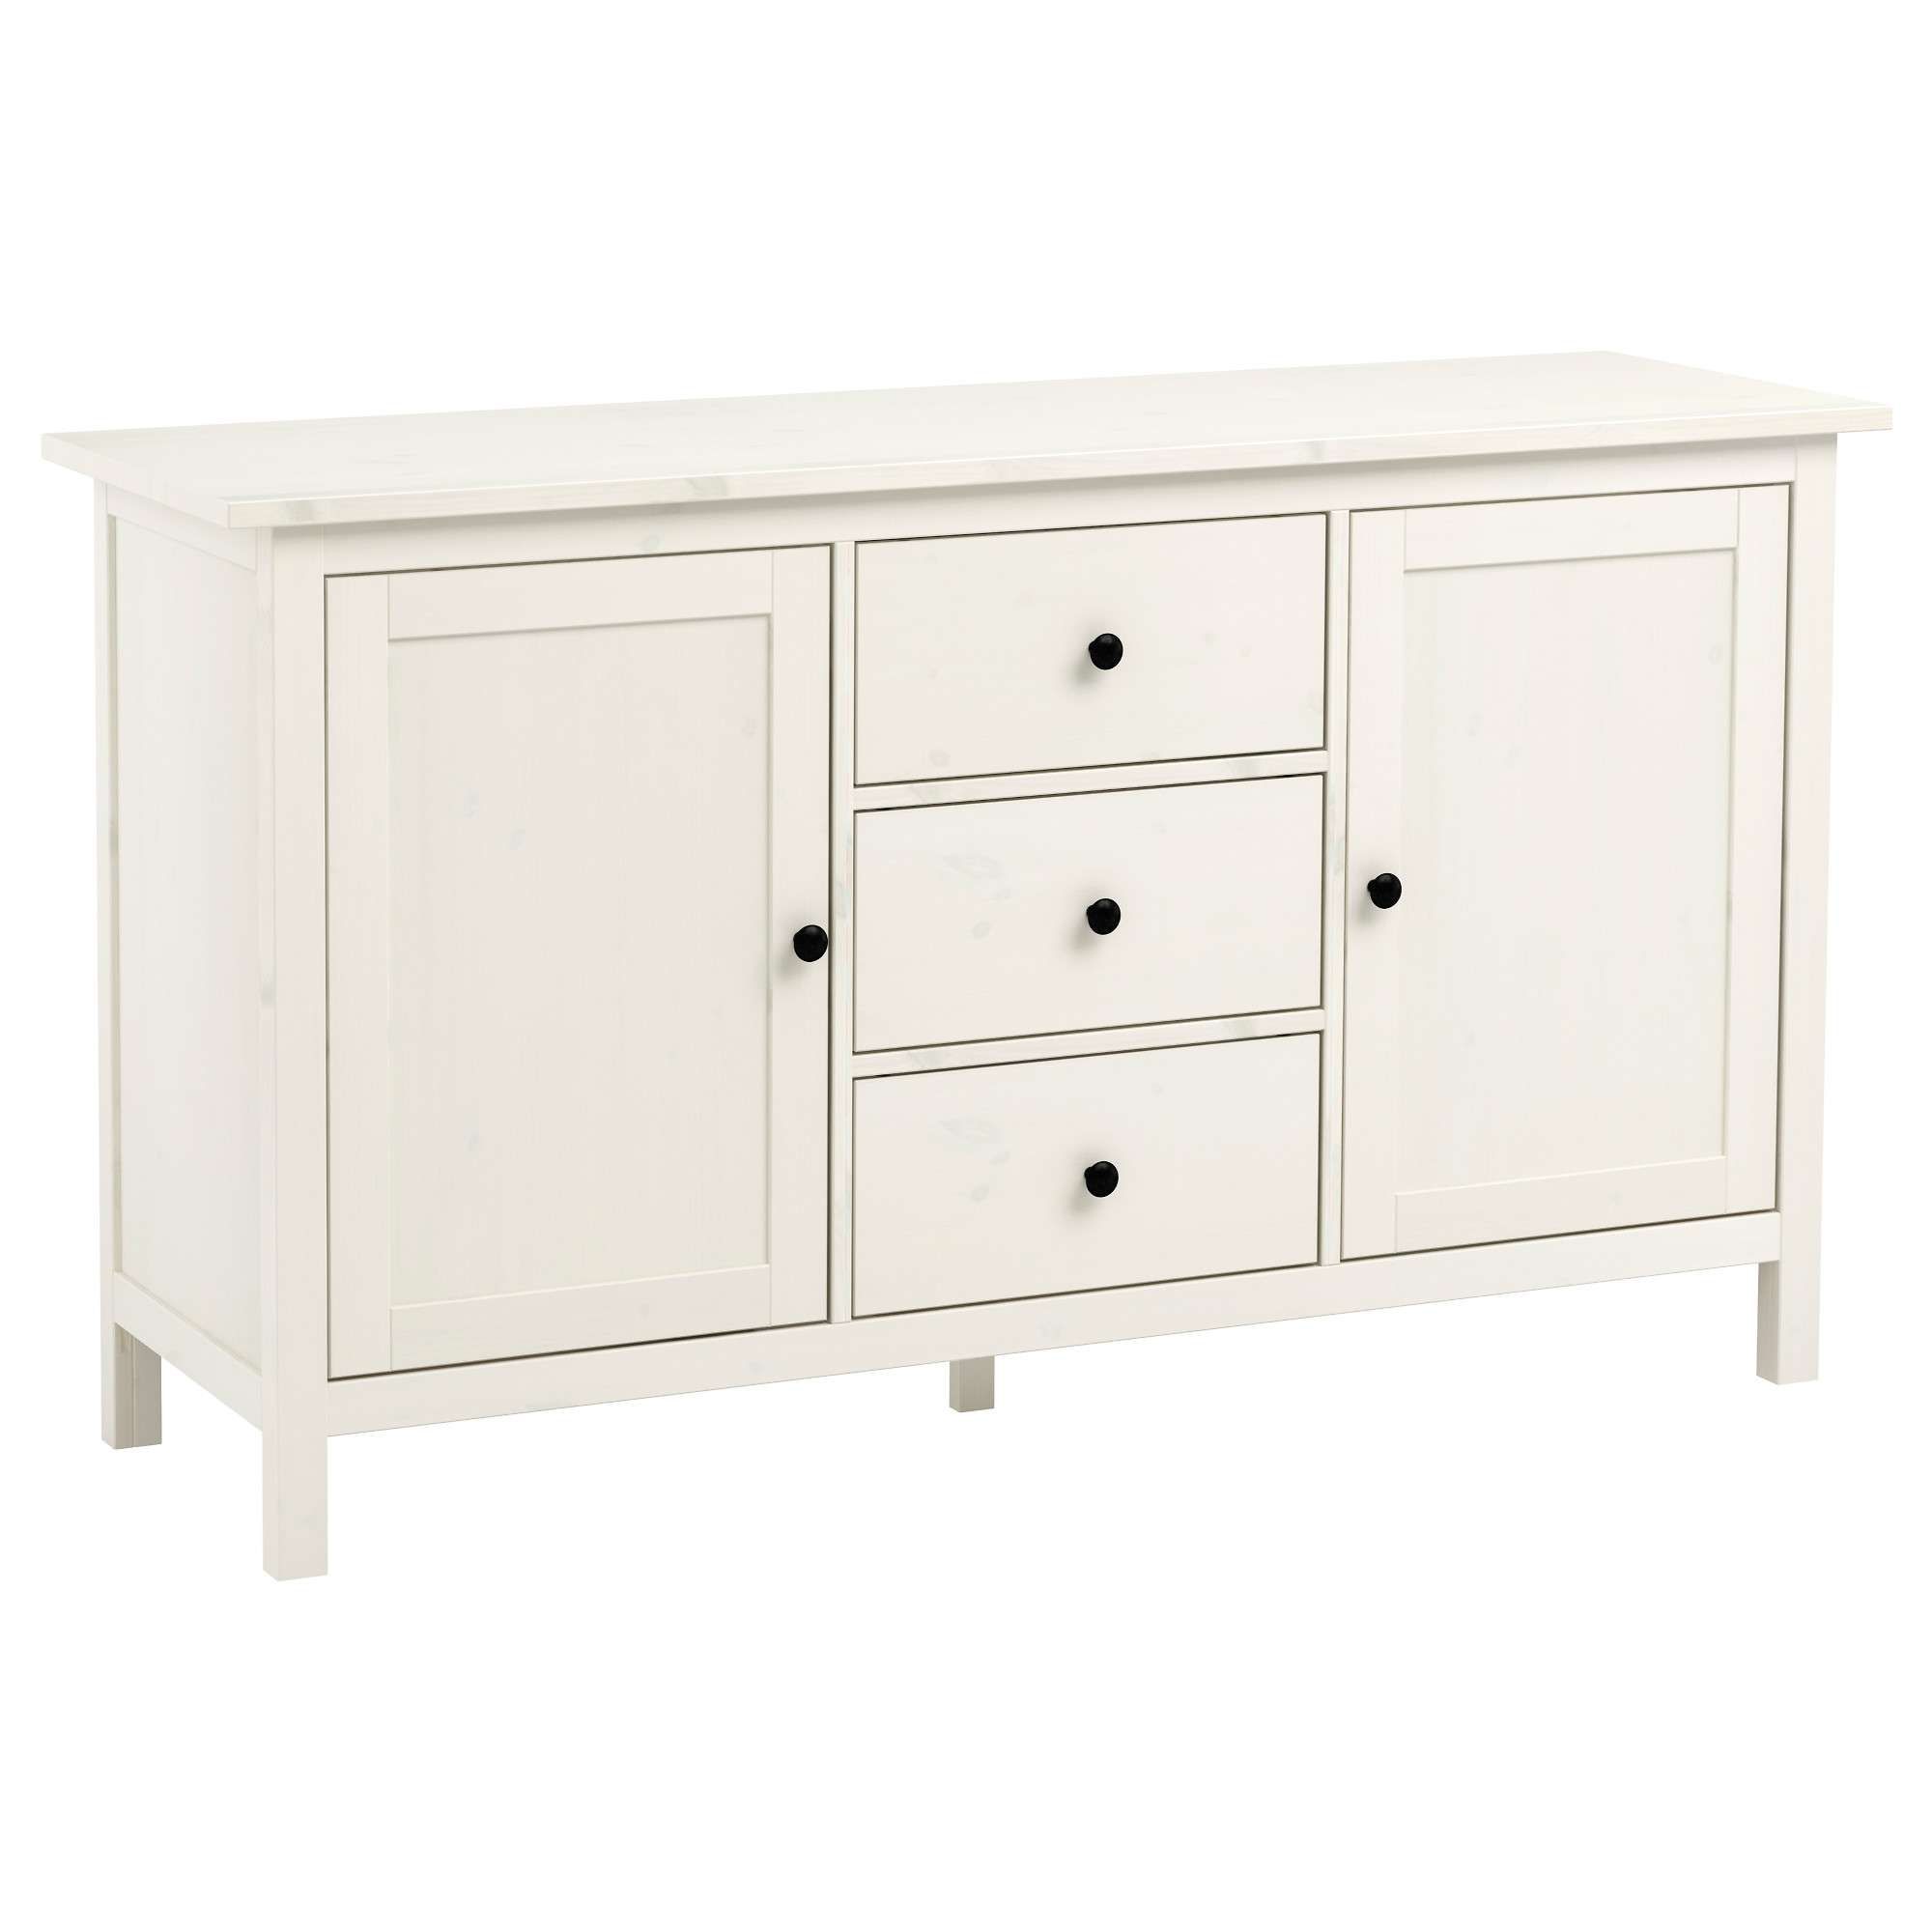 Hemnes Sideboard – White Stain – Ikea With Regard To Cheap Sideboards Cabinets (View 4 of 20)